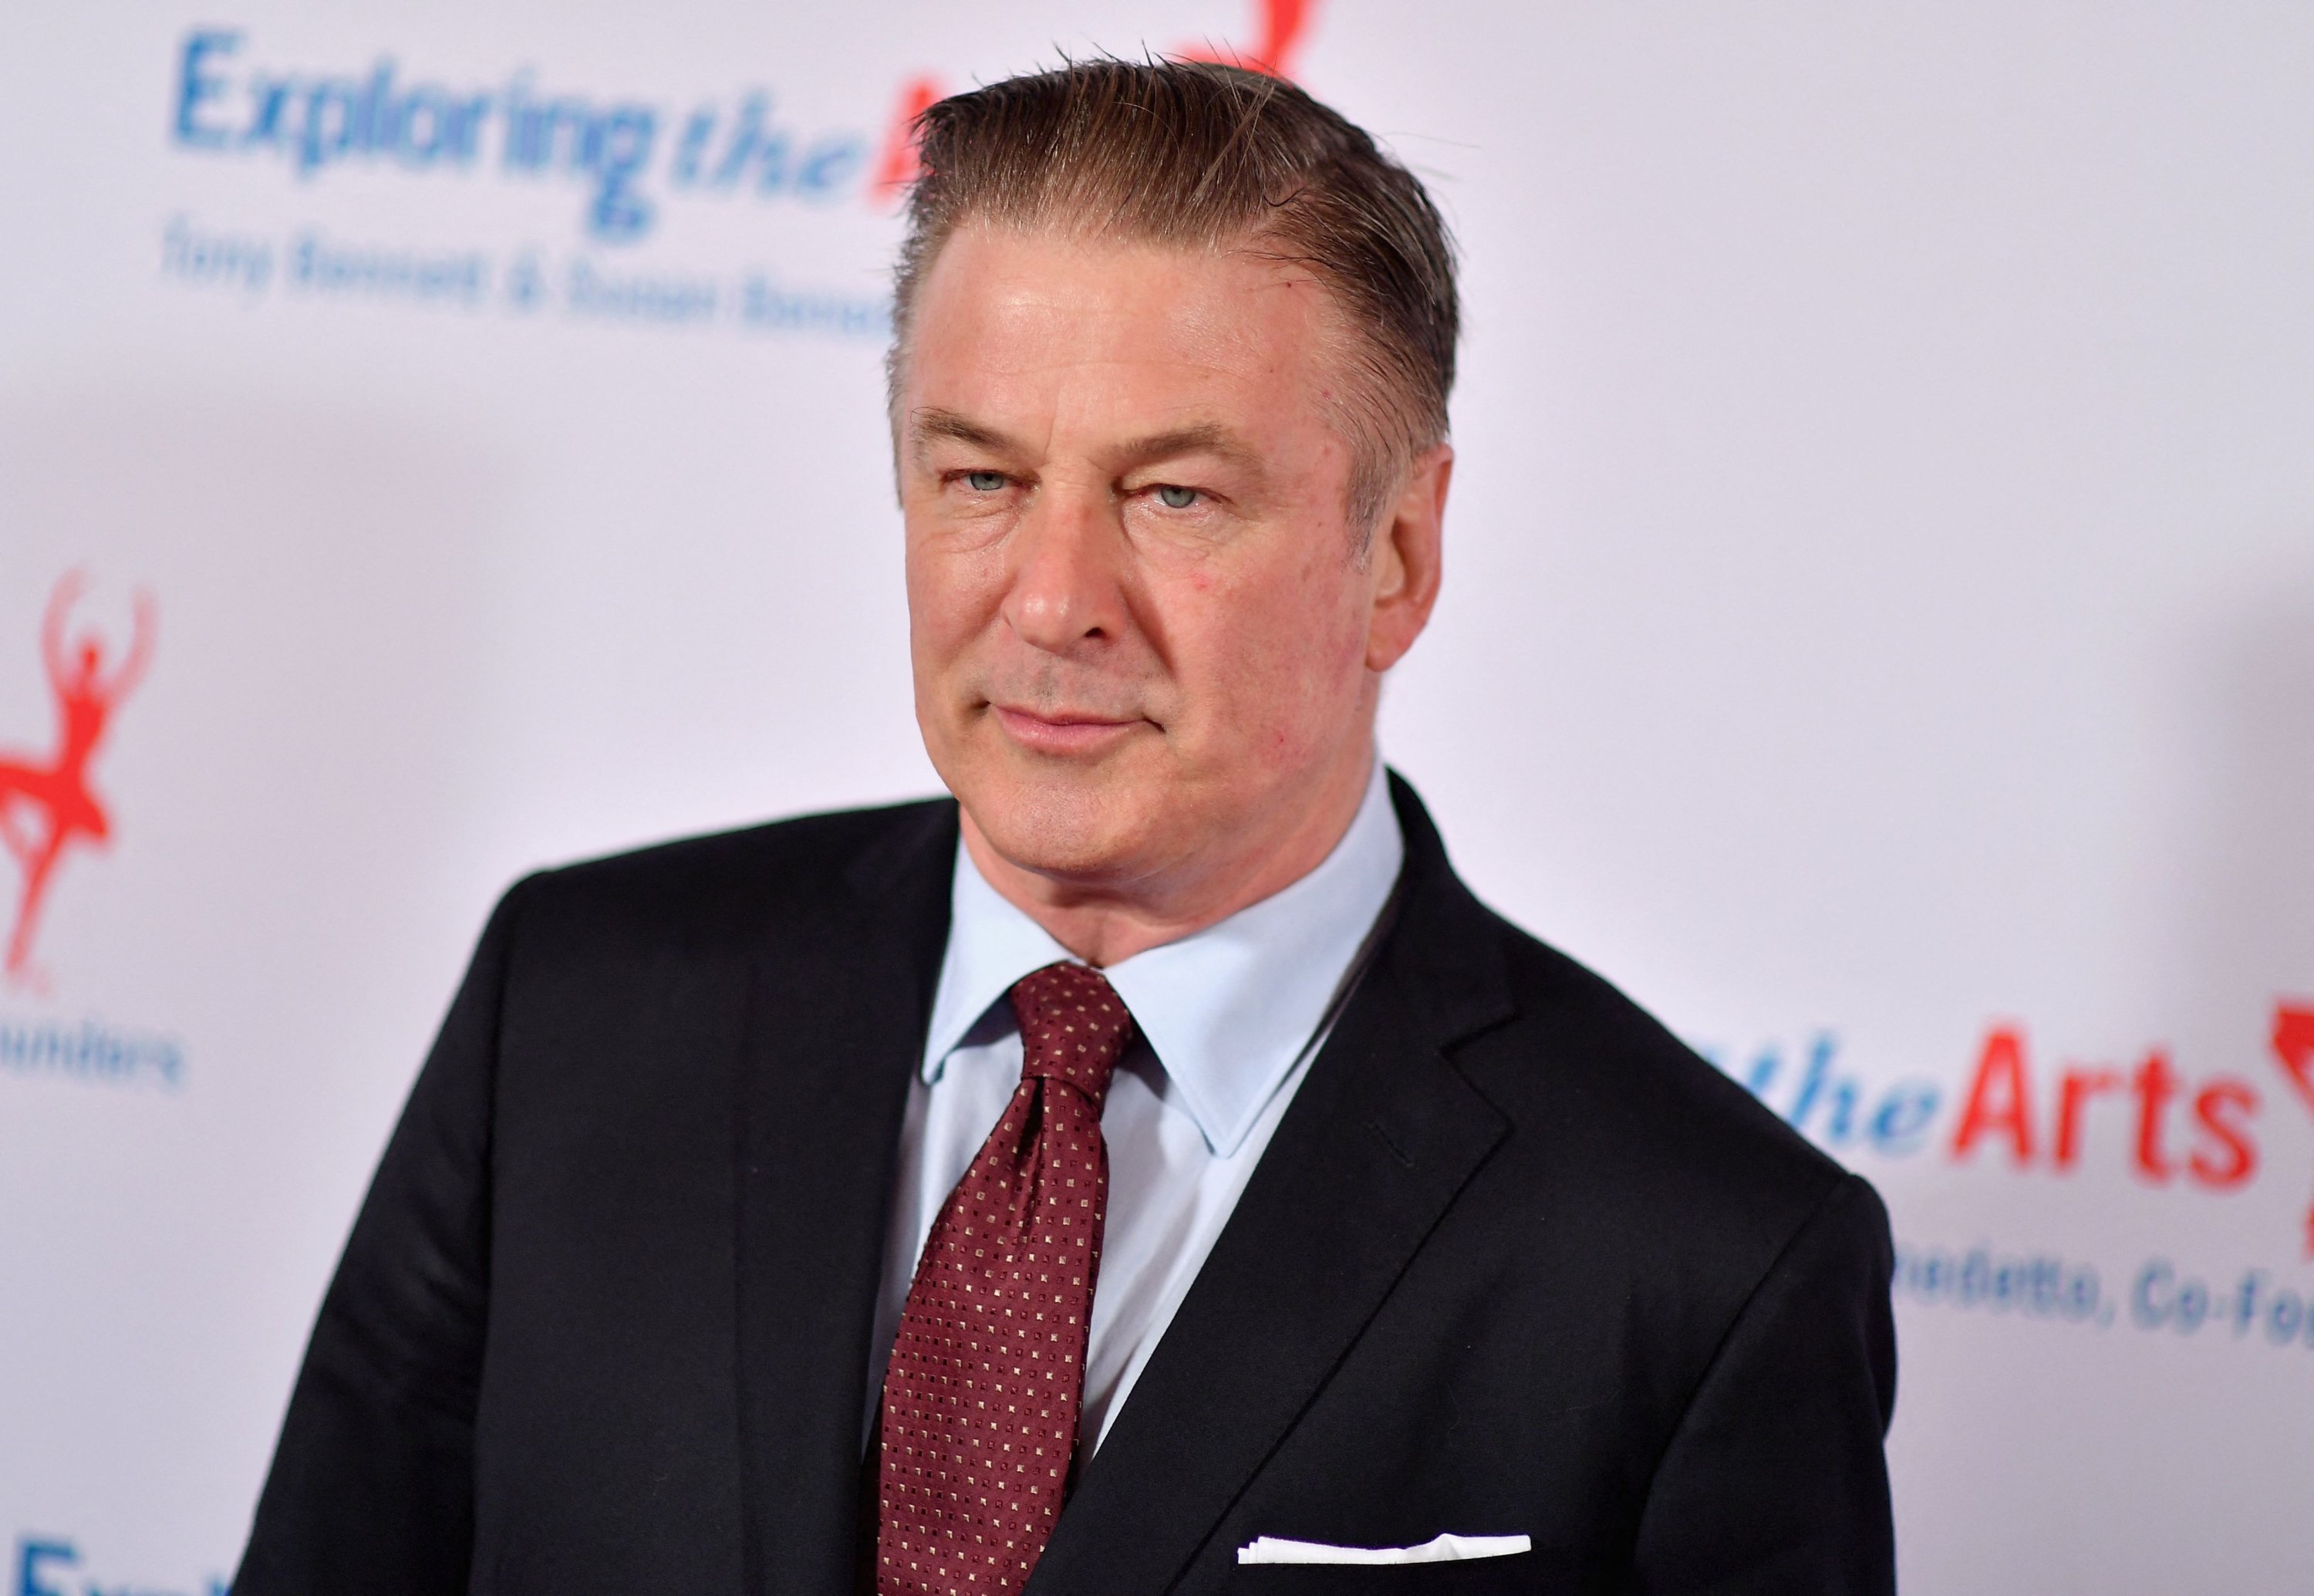 Actor Alec Baldwin attends the Exploring the Arts 20th anniversary gala at Hammerstein Ballroom in New York City, U.S., April 12, 2019. (AFP)